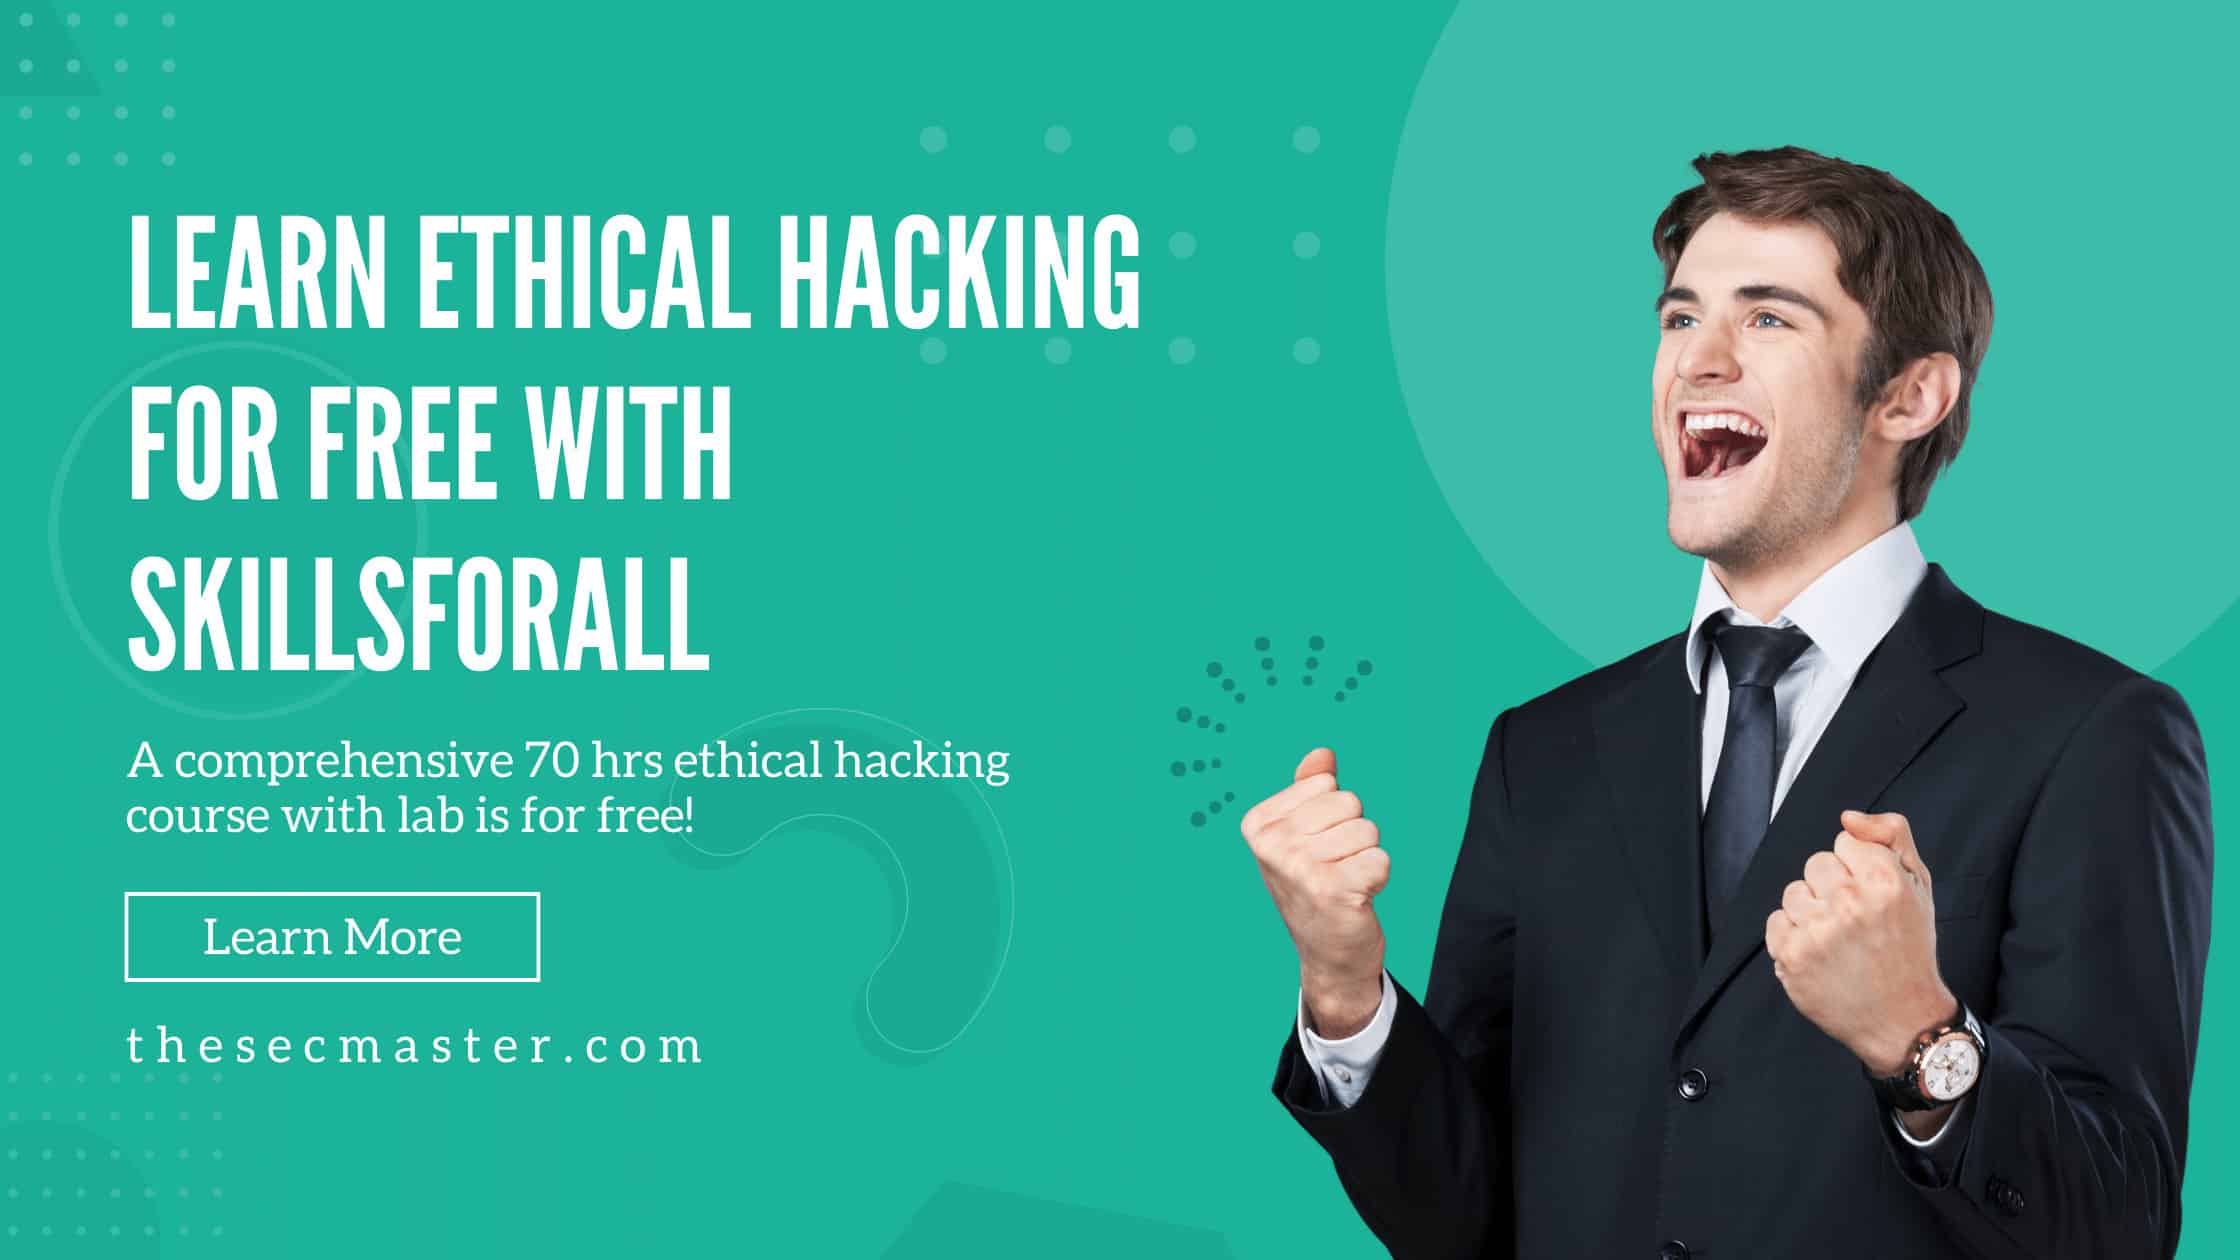 Learn Ethical Hacking For Free With Skillsforall